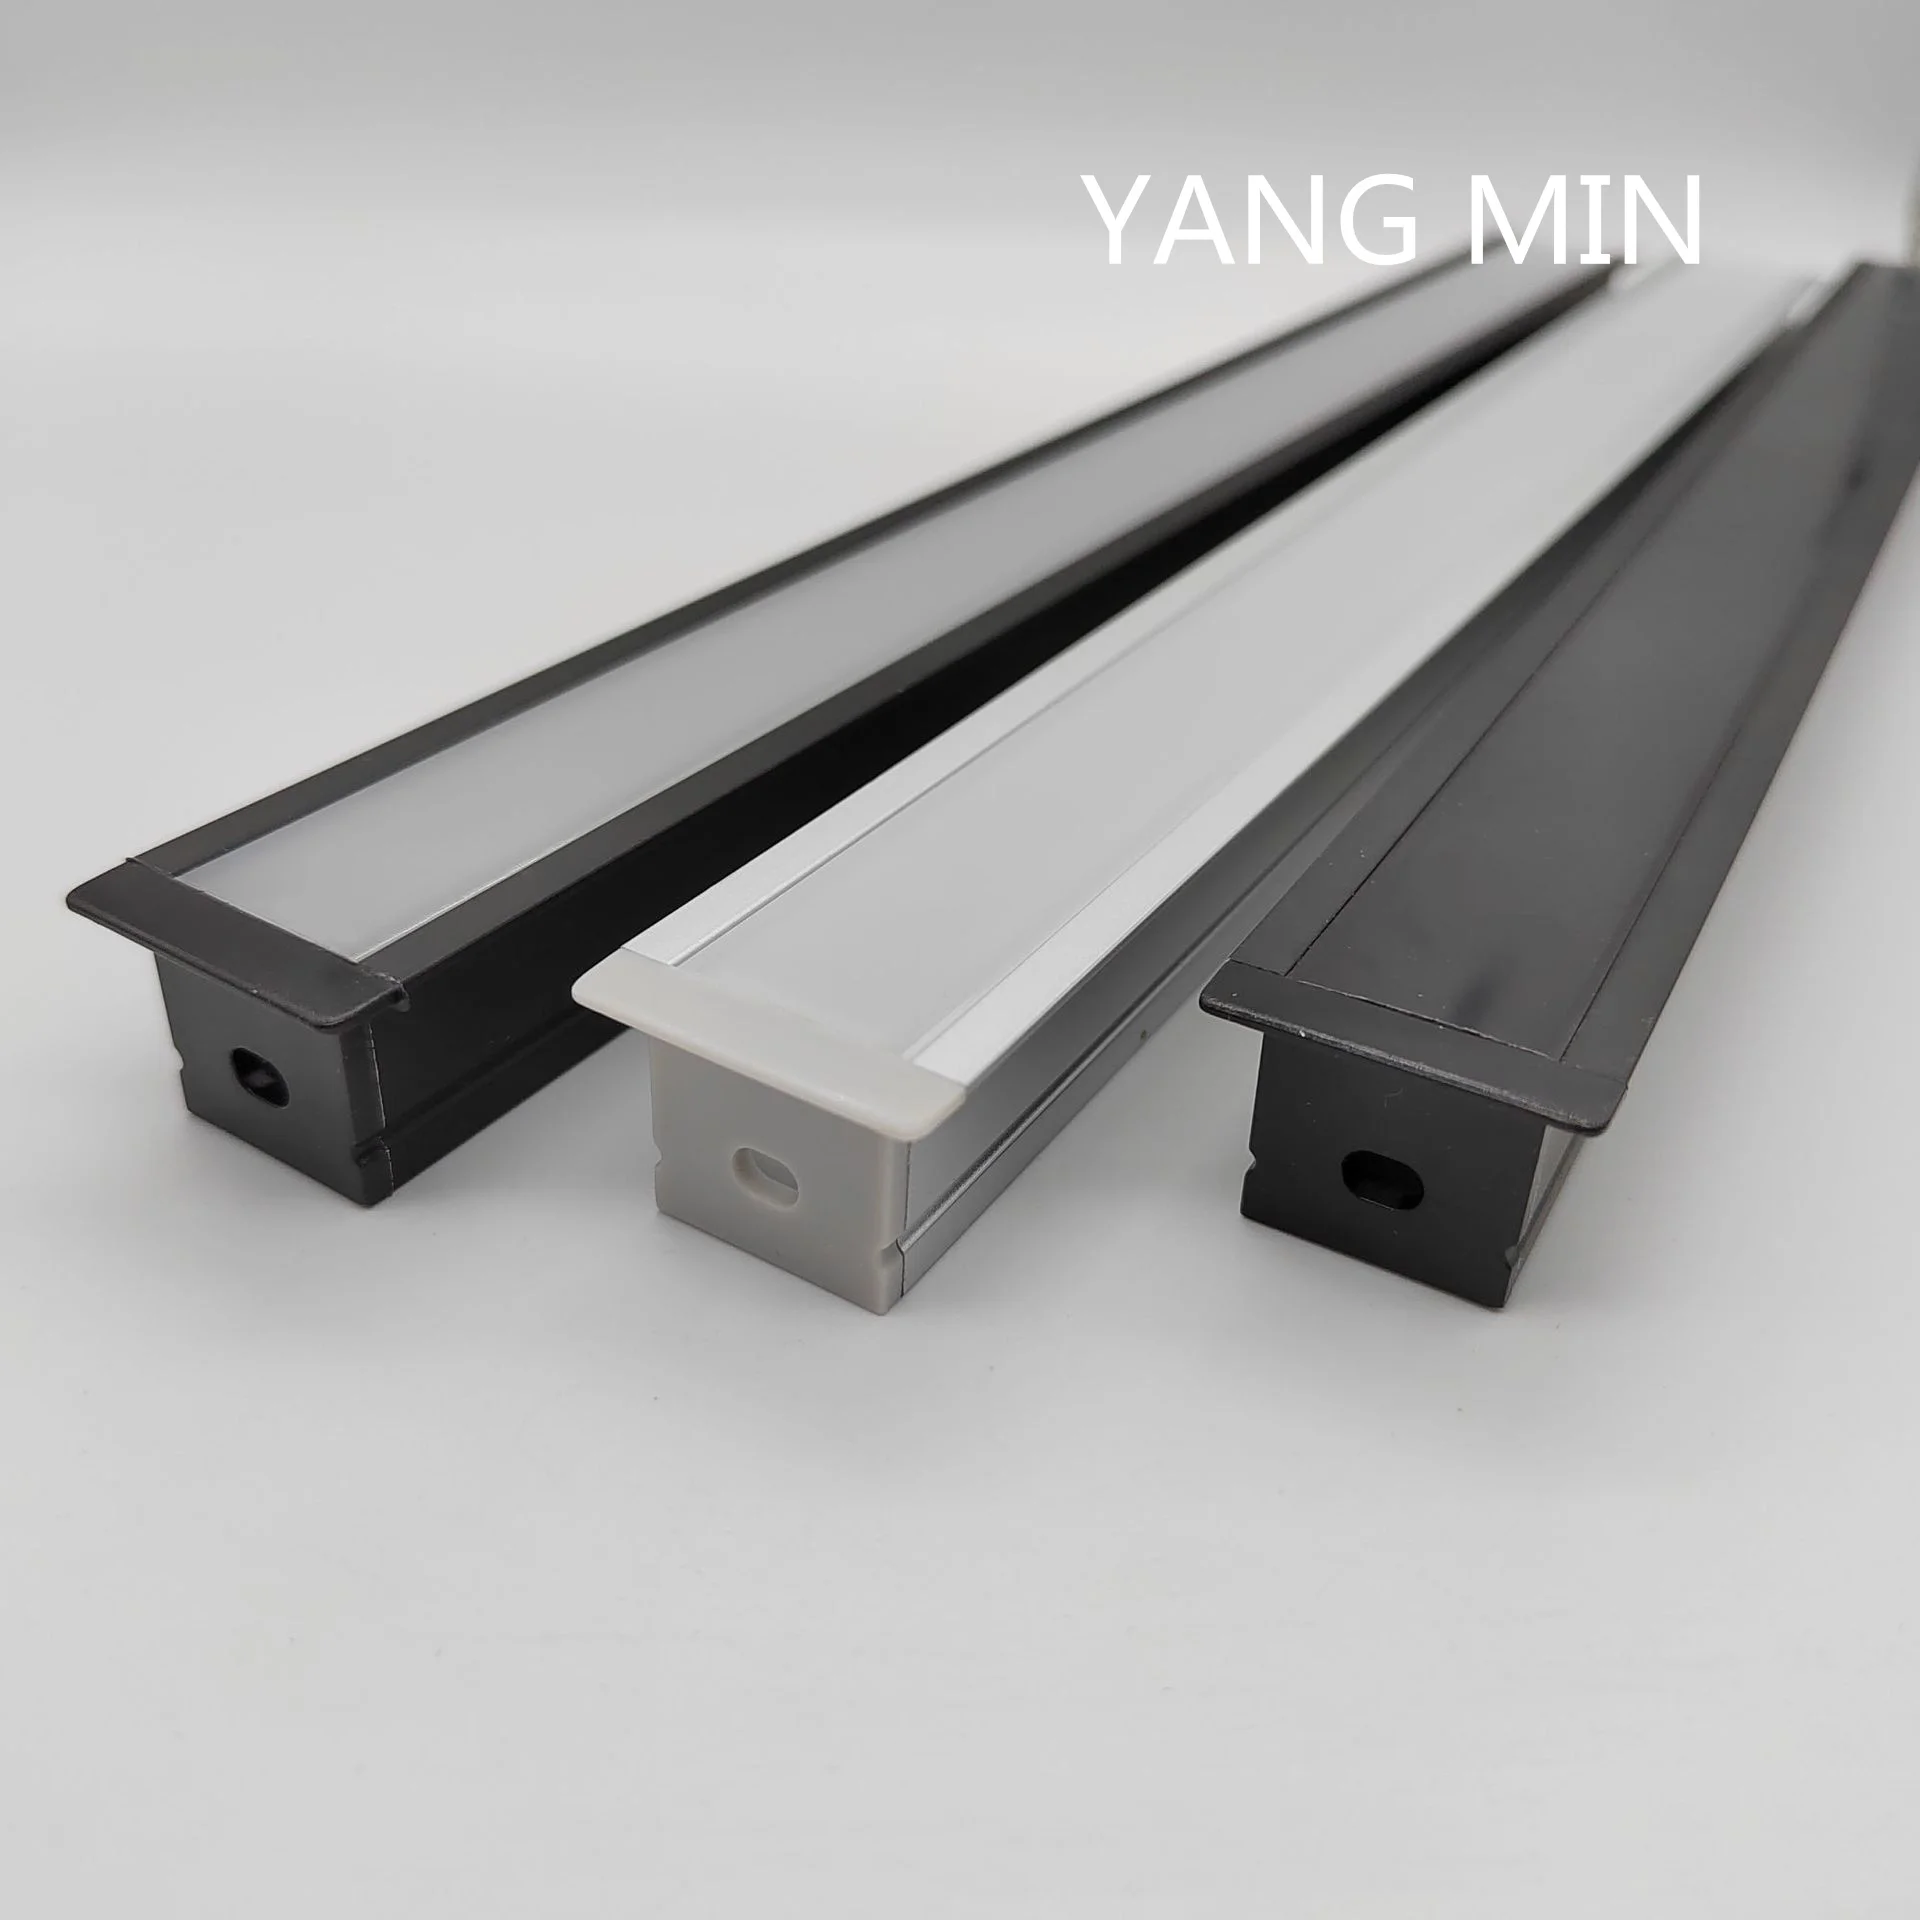 Free Shipping  U Shape 20mm Deep Recessed Aluminium  Profile for LED Strip kitchen cabinet Lighting 2m/pcs free shipping 2m pcs kitchen cabinet aluminum profile suit for strip 2835 5630 5050 2835